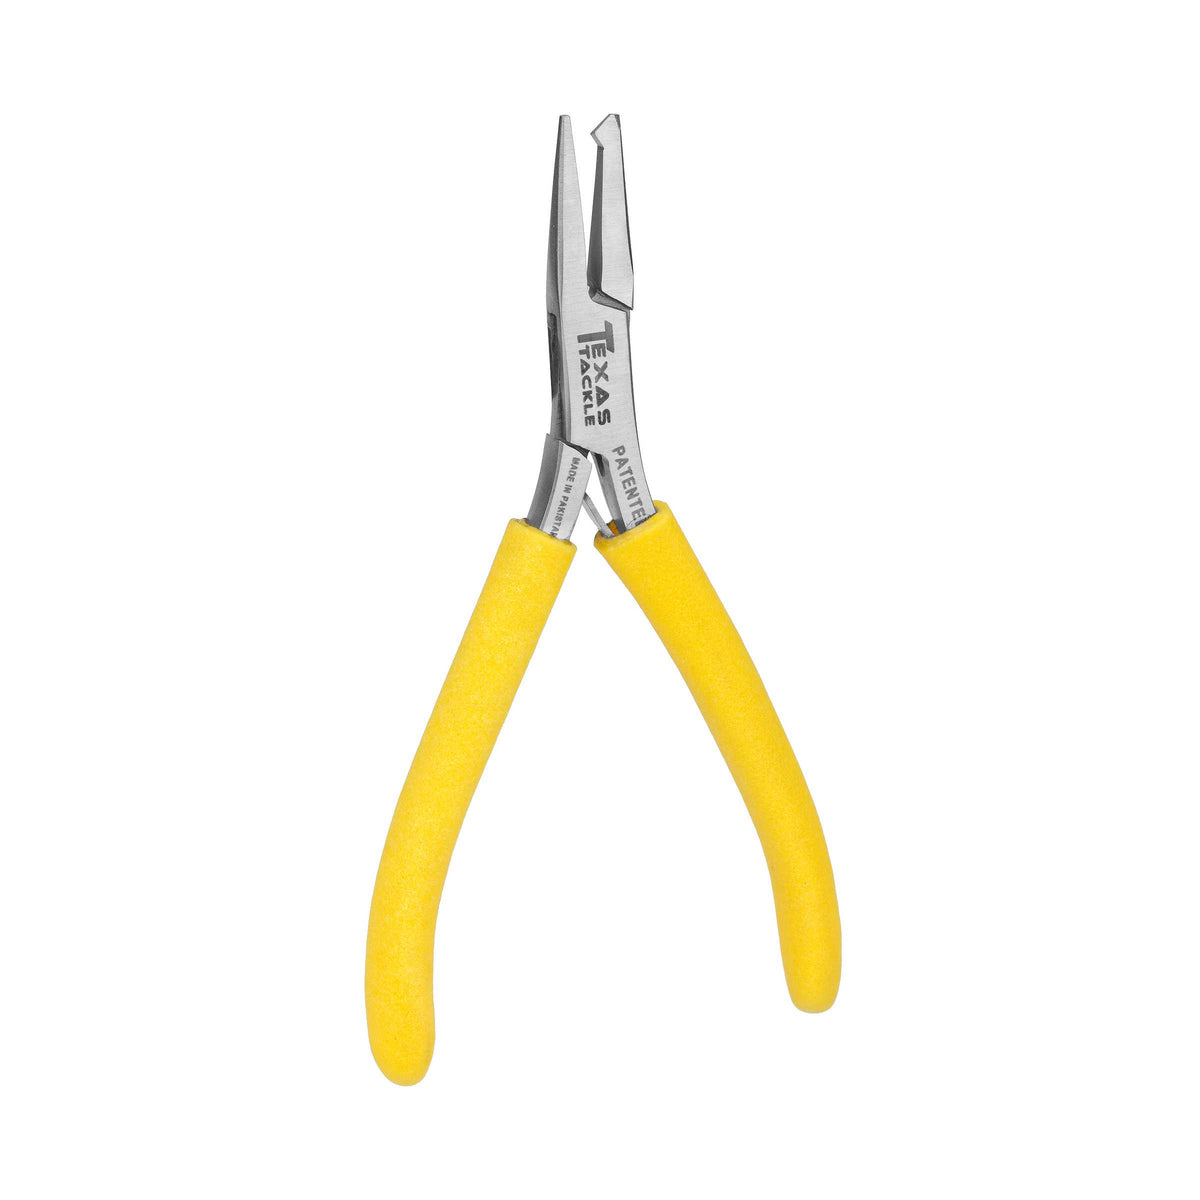  Texas Tackle 30100 Split-Ring Plier Small Sz Orange : Fishing  Pliers And Tools : Sports & Outdoors